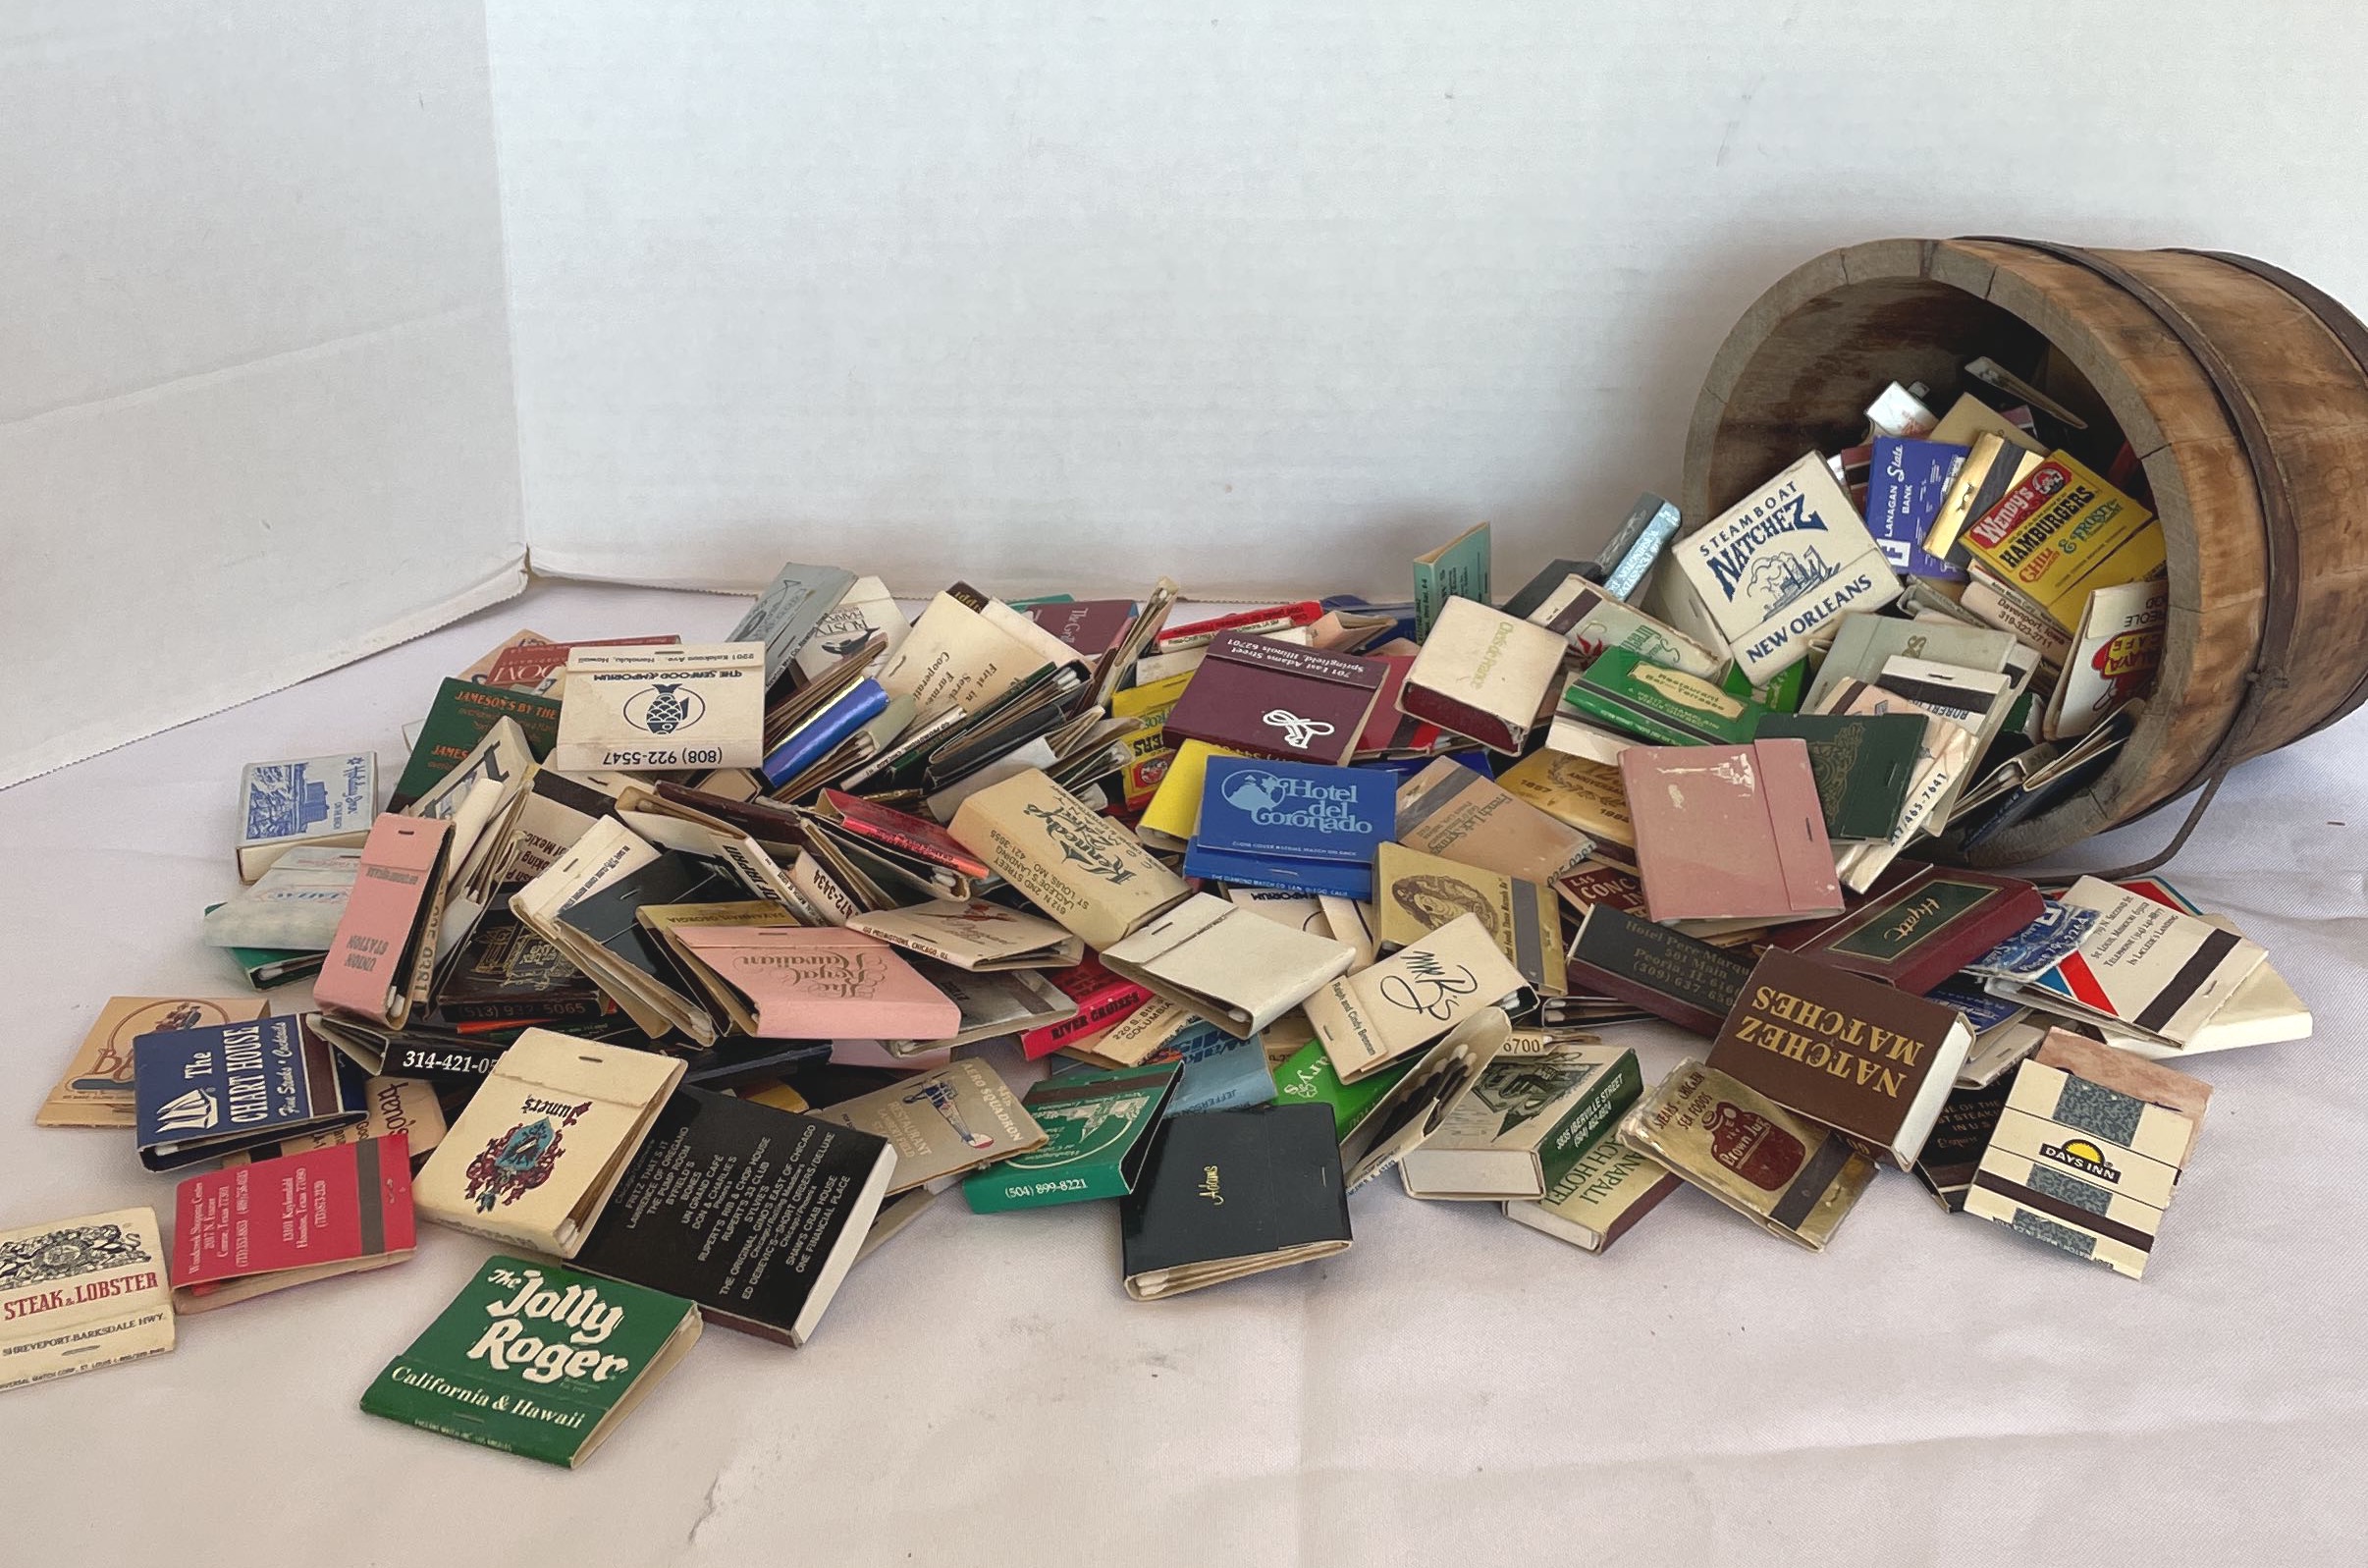 Lot 87 - Coin Collecting Supplies - Huge Lot - Sac Valley Auctions